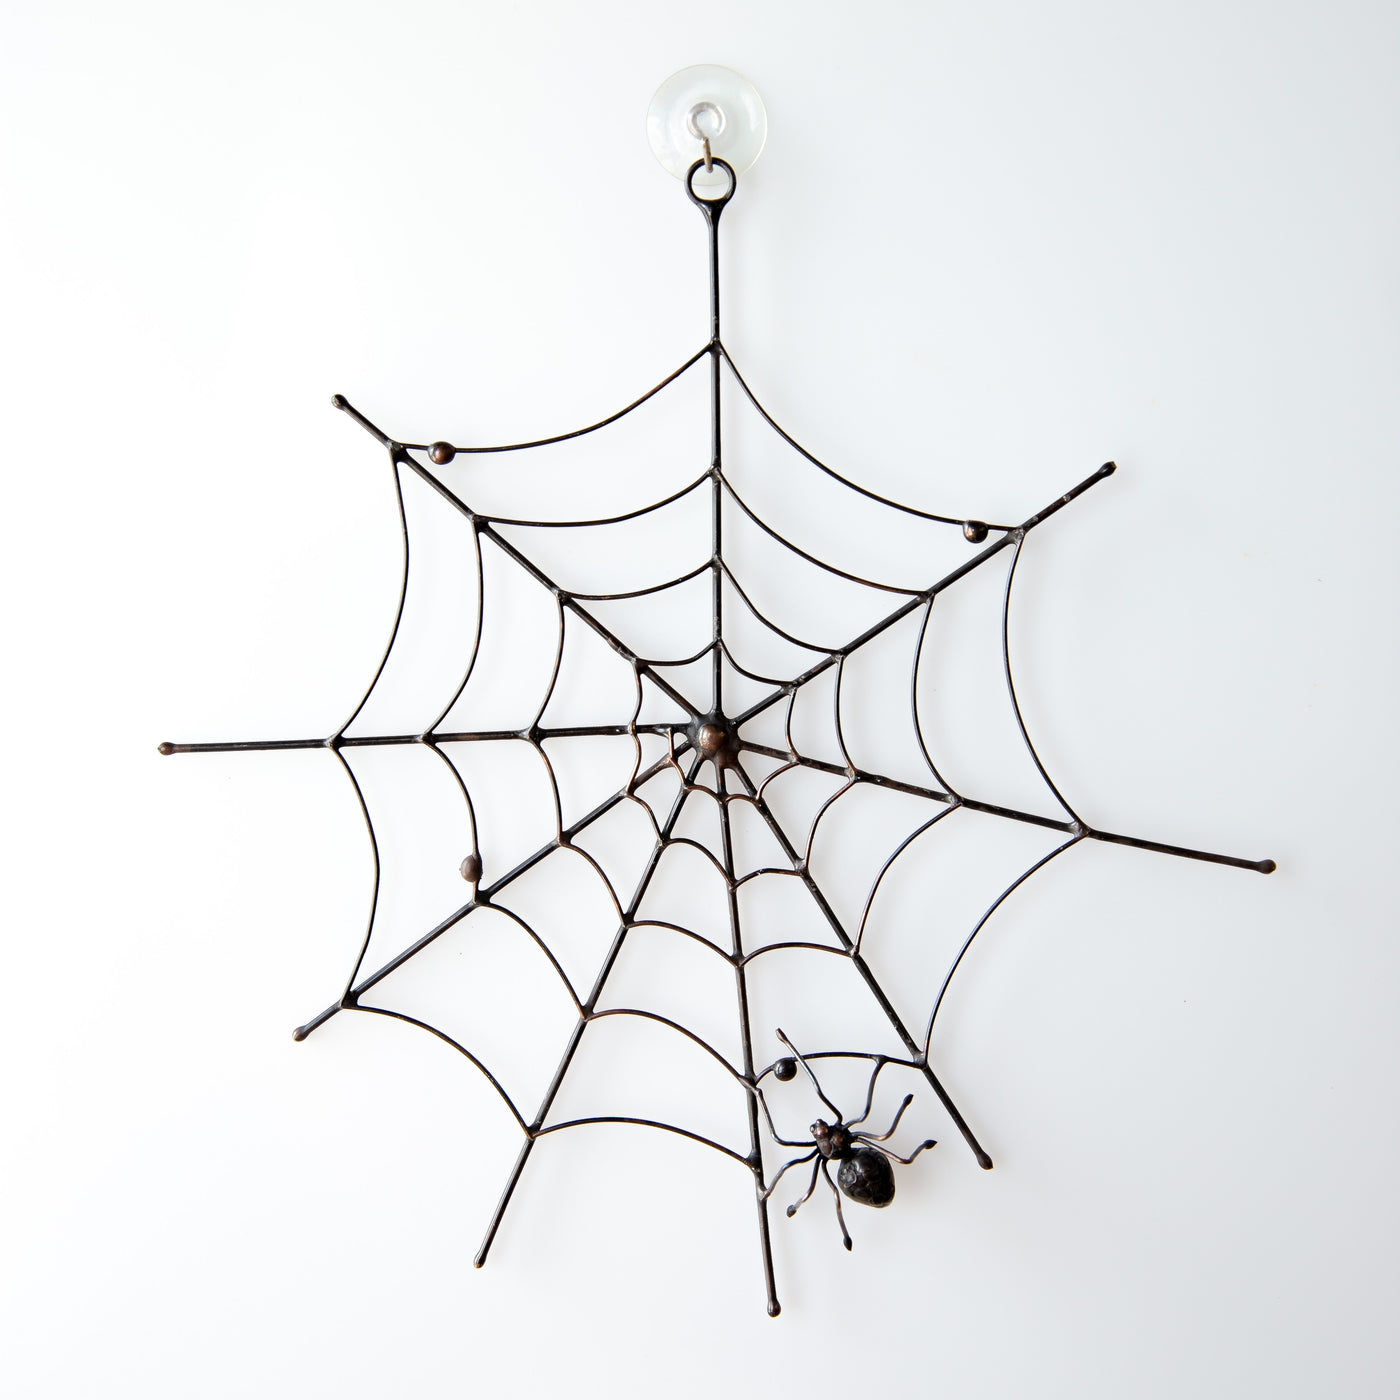 Round Halloween spider web spooky decor made of copper wire